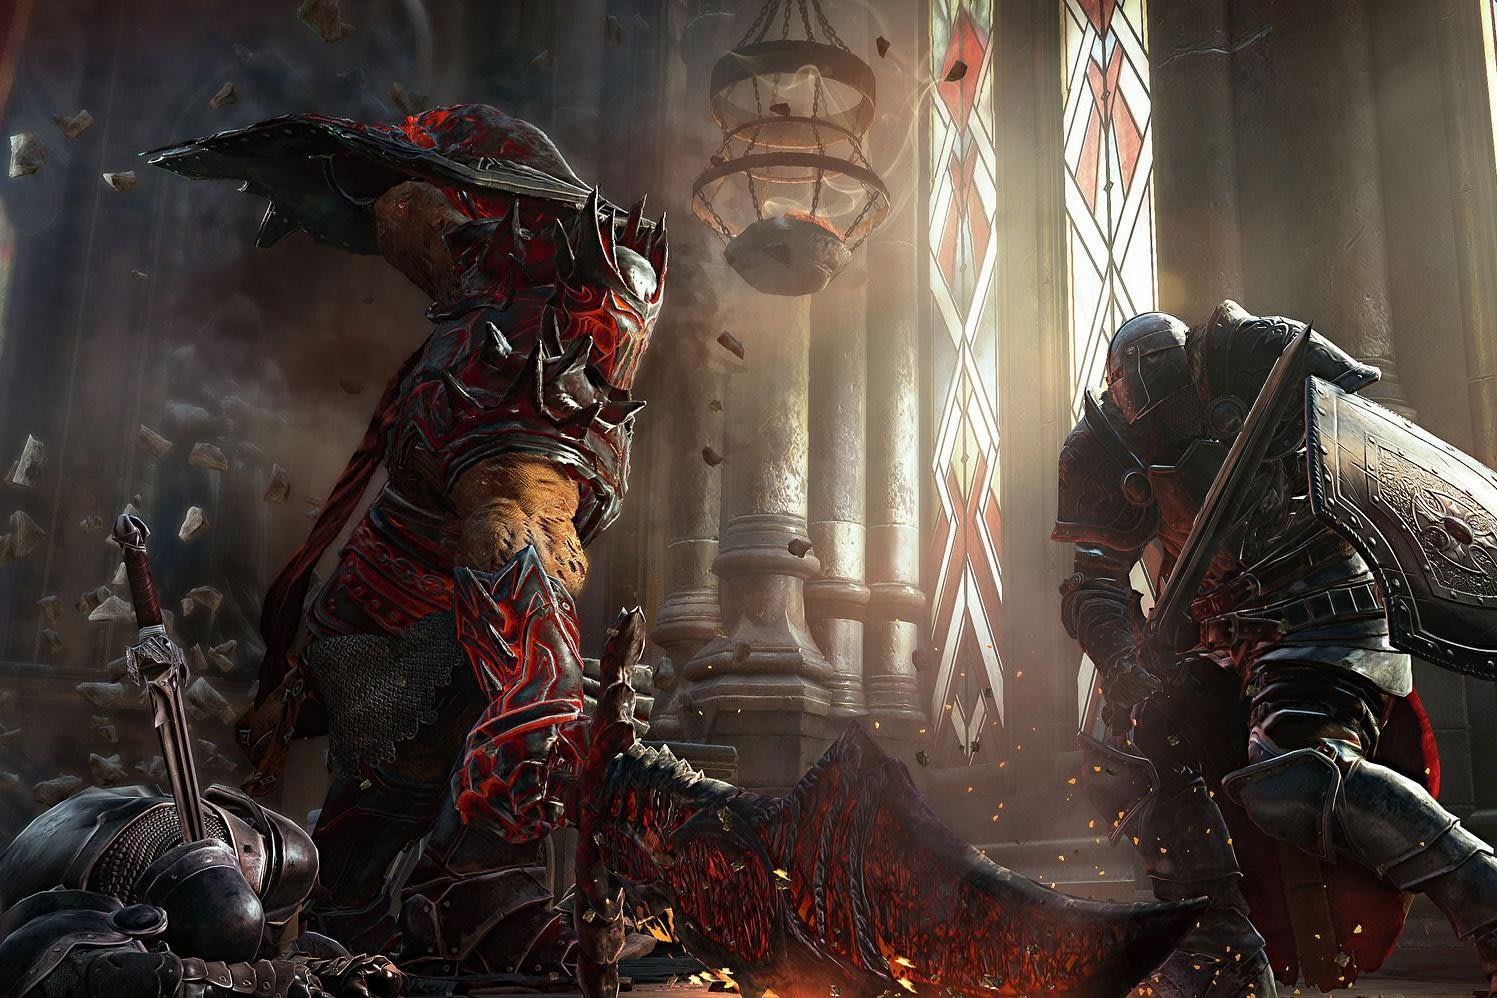 Lords of the Fallen patch increases challenge of bosses